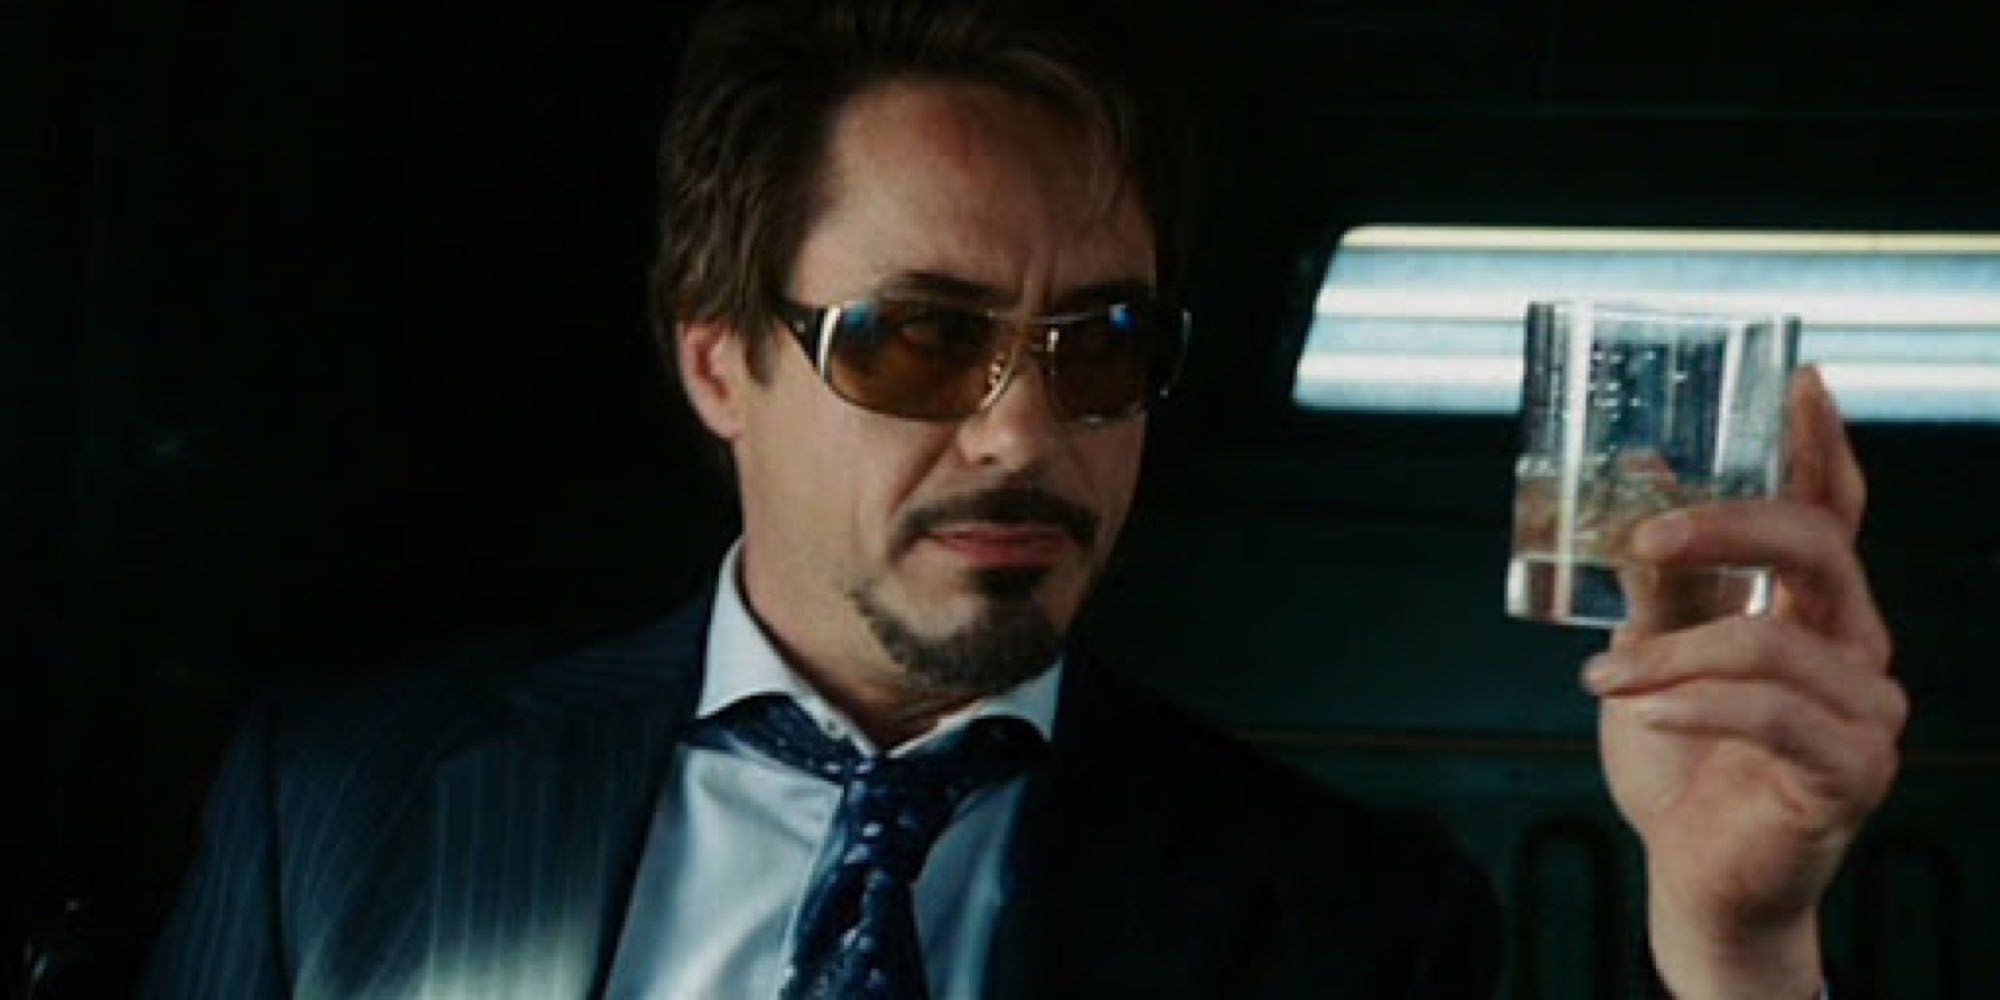 Robert Downey Jr Finally Earned His First 100% Rotten Tomatoes Score